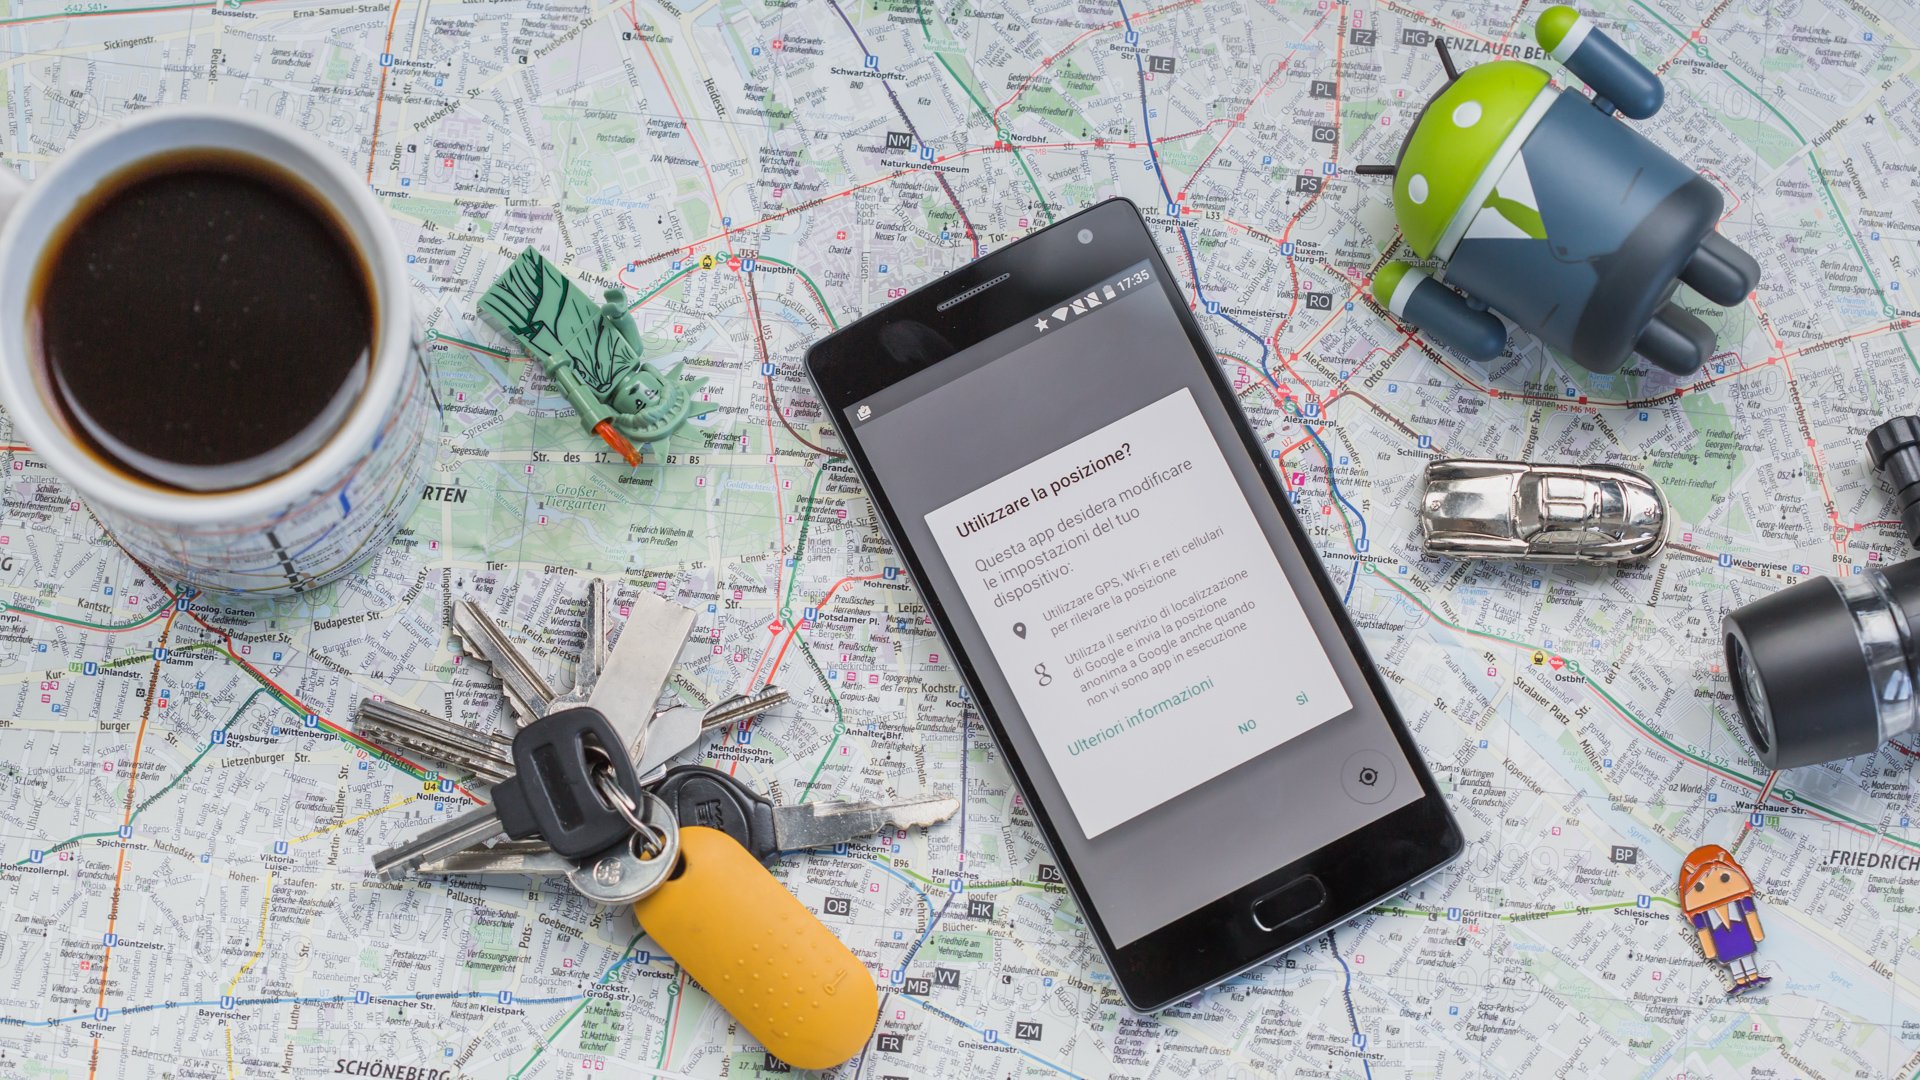 How to use Google Maps using less battery